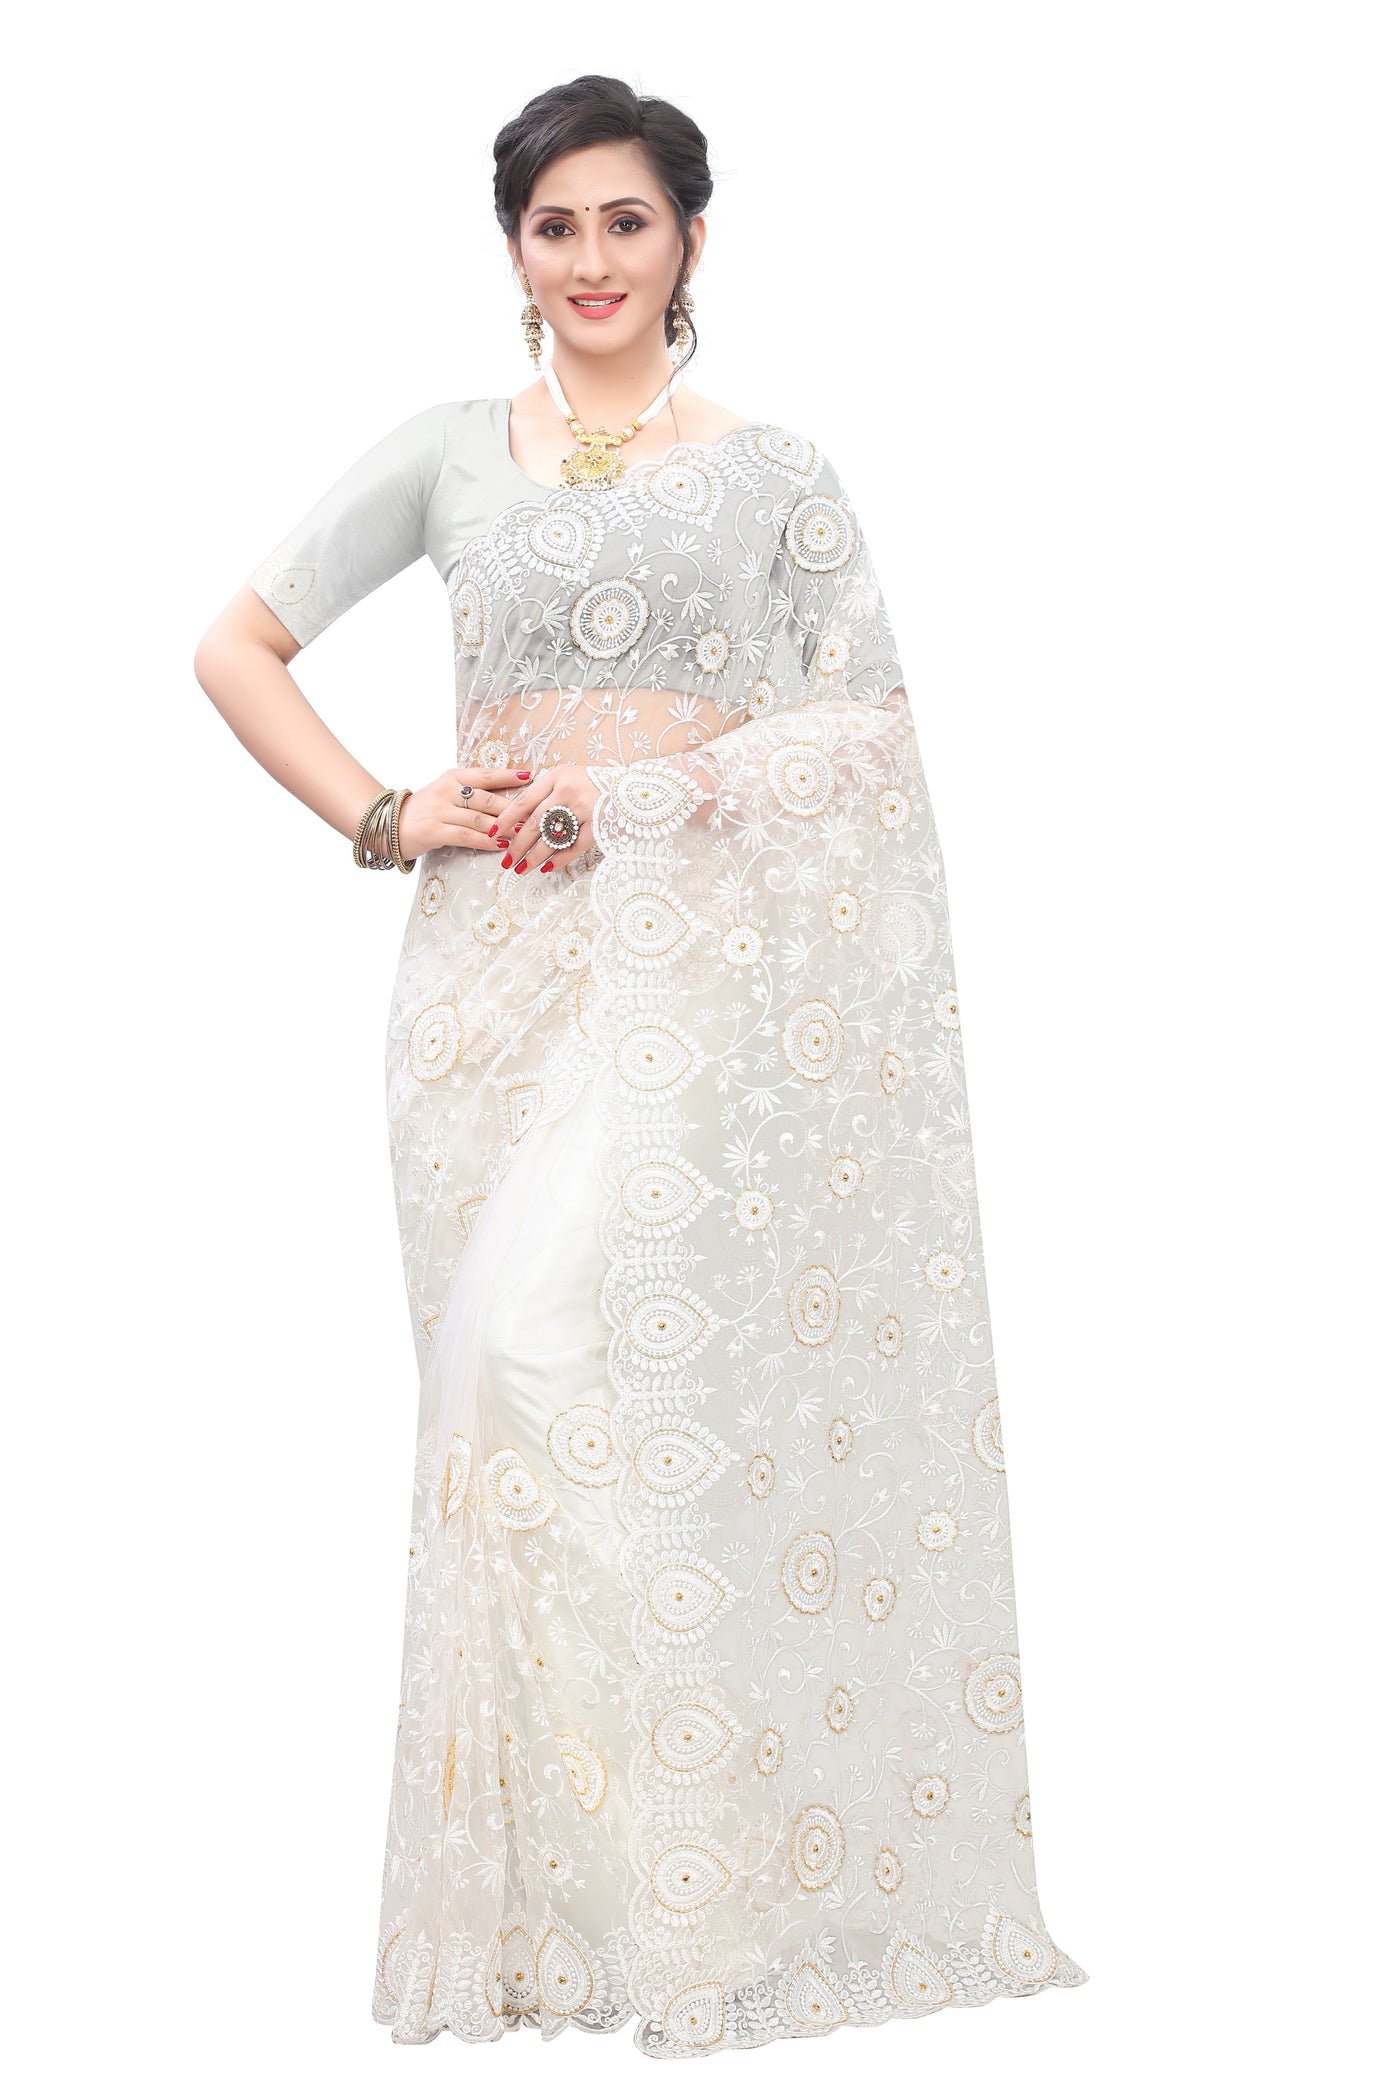 Net White Saree With Blouse